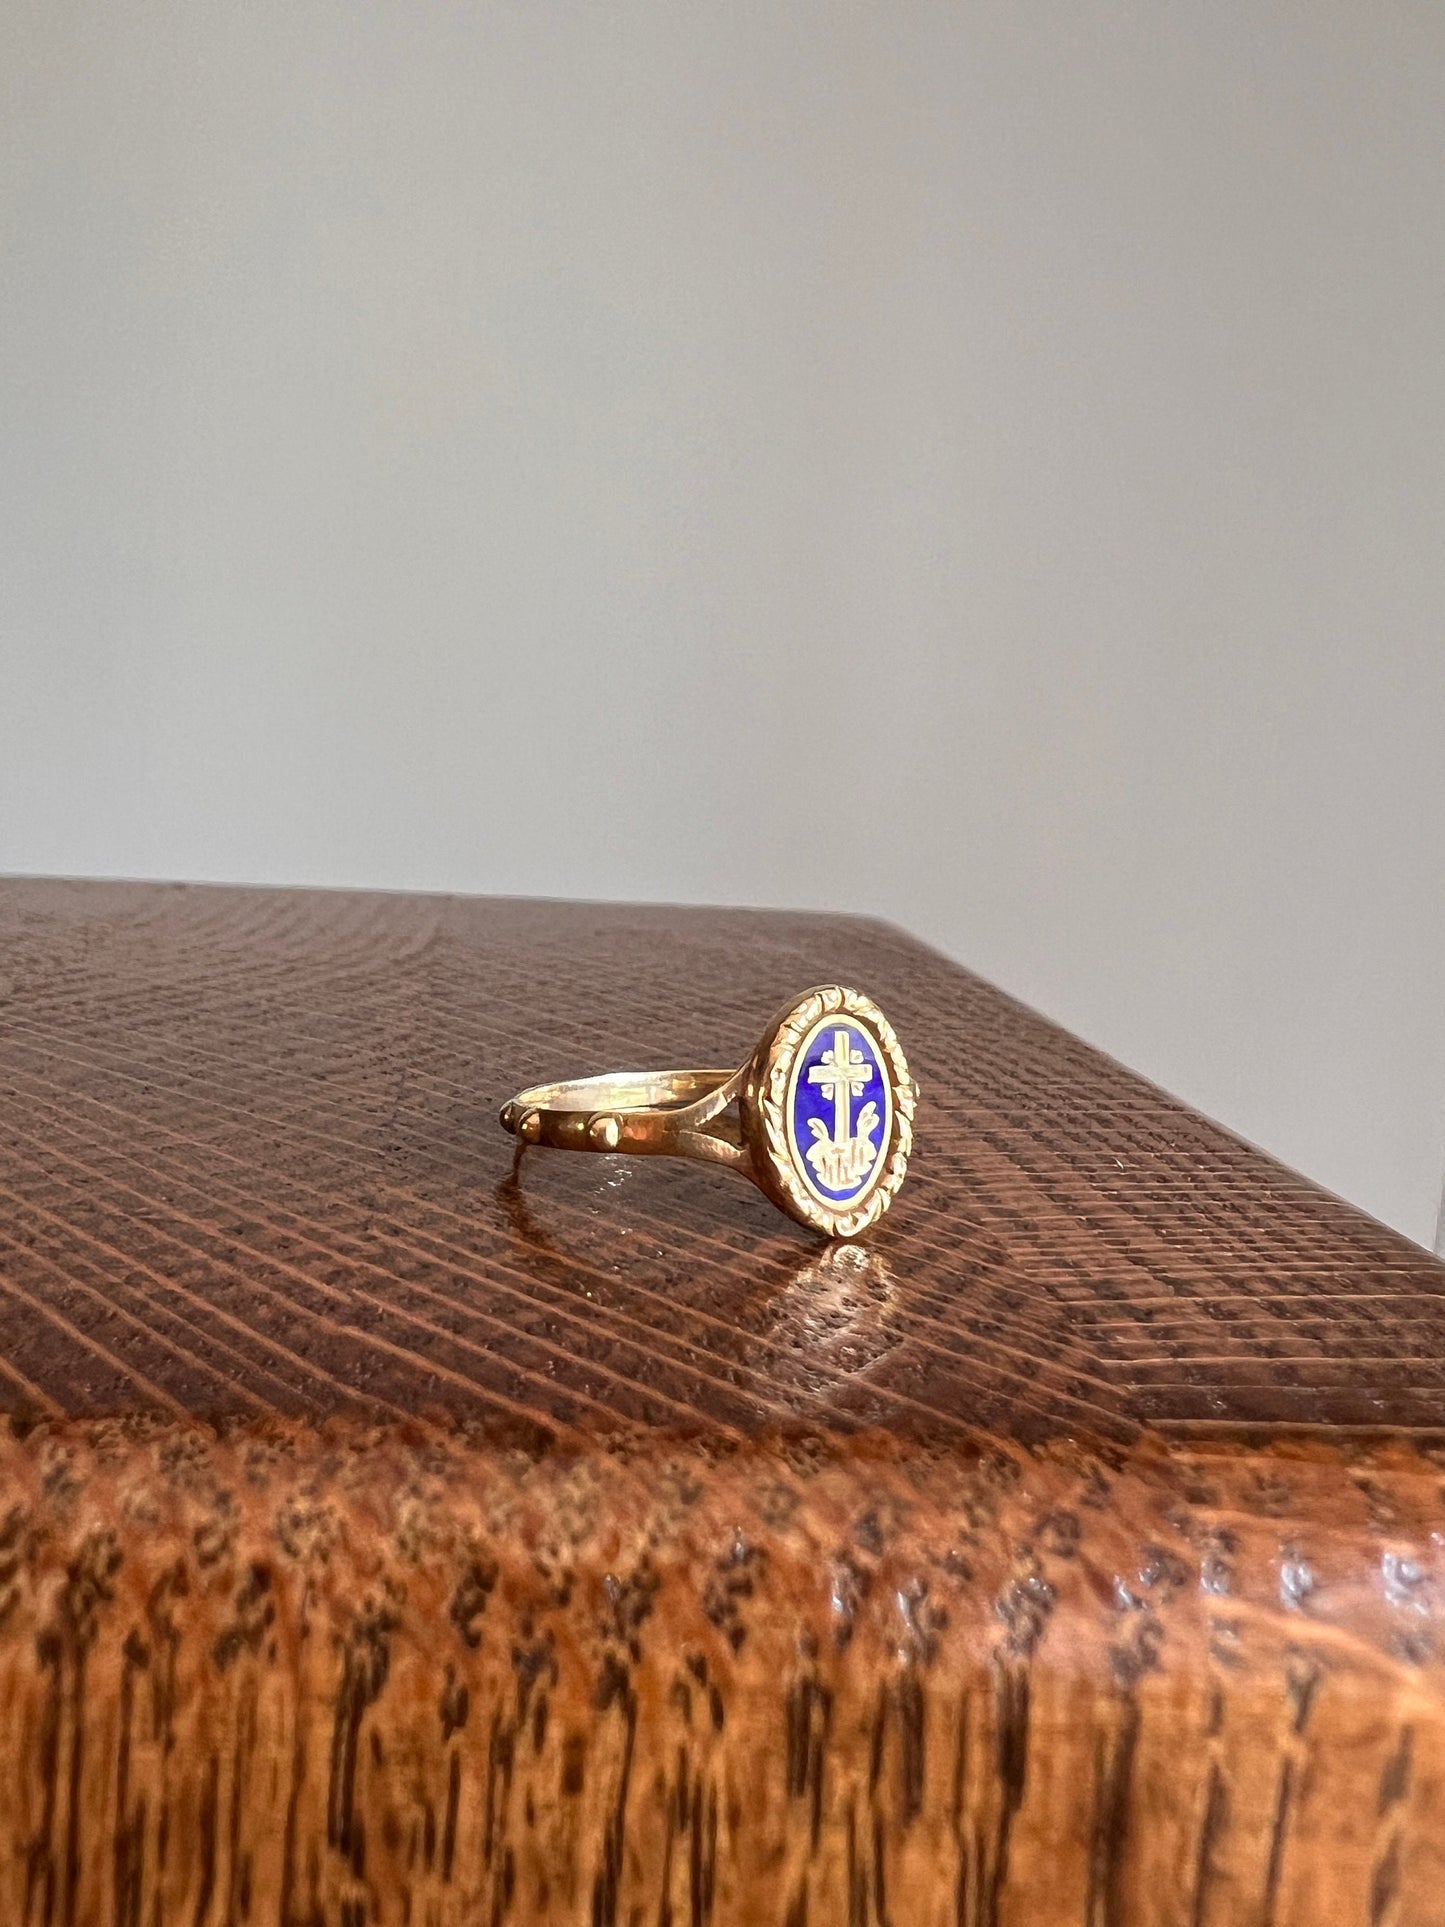 French Antique Cross Blue Enamel Ring 18k Gold Oval Halo Ball Rivets Victorian Belle Epoque Romantic Gift Figural Cobalt Navy Religious